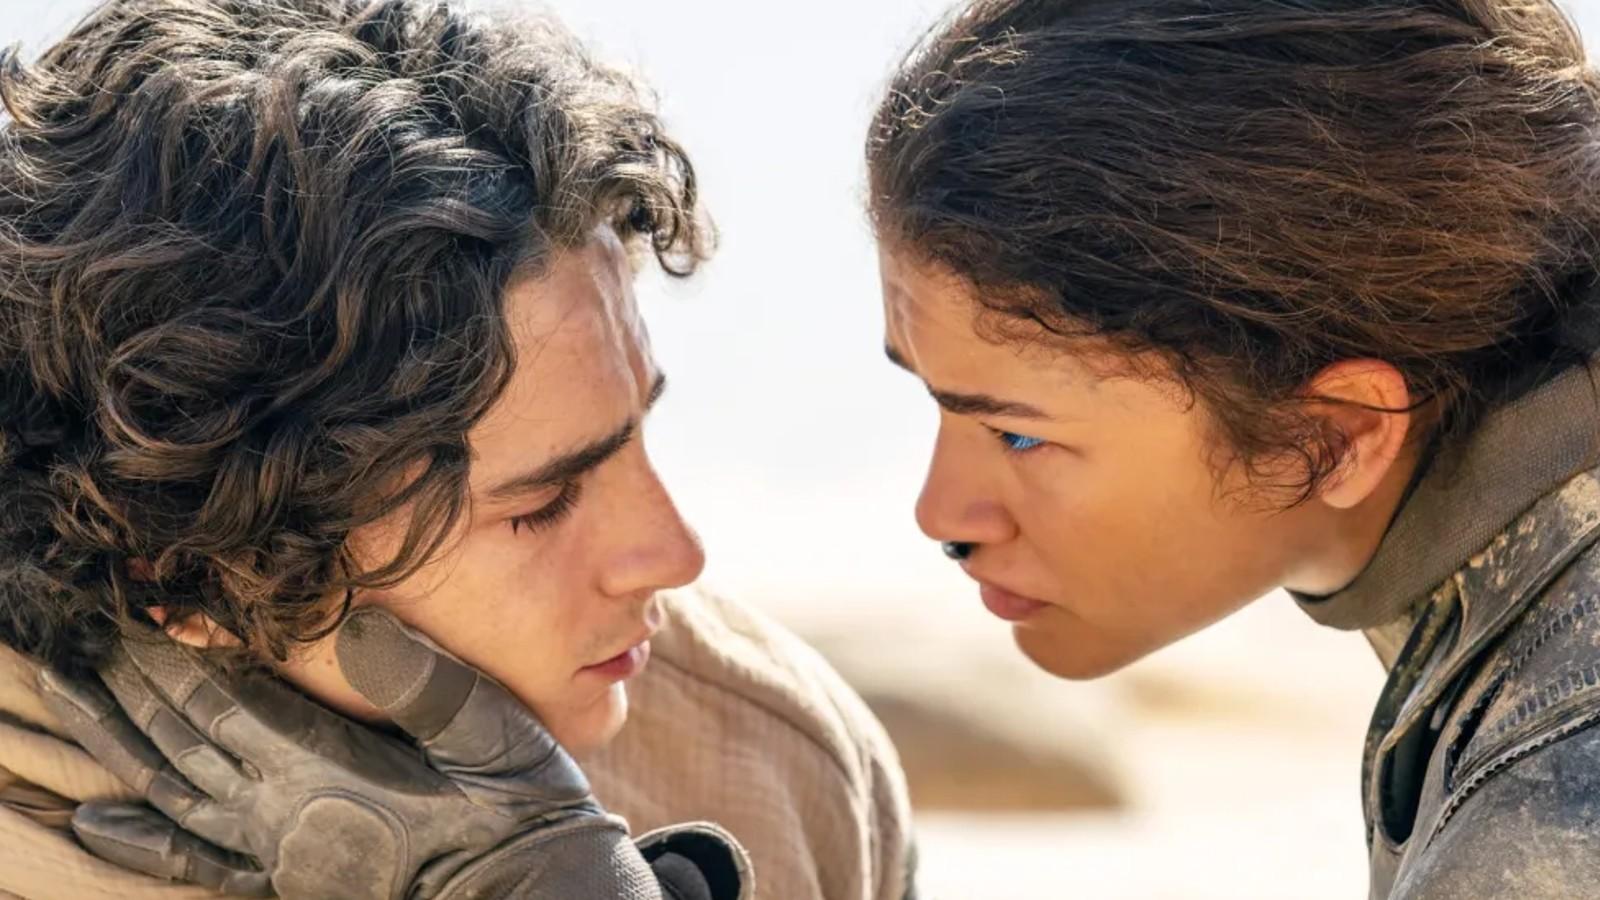 Timothee Chalamet and Zendaya sharing a tender moment in Dune Part Two.